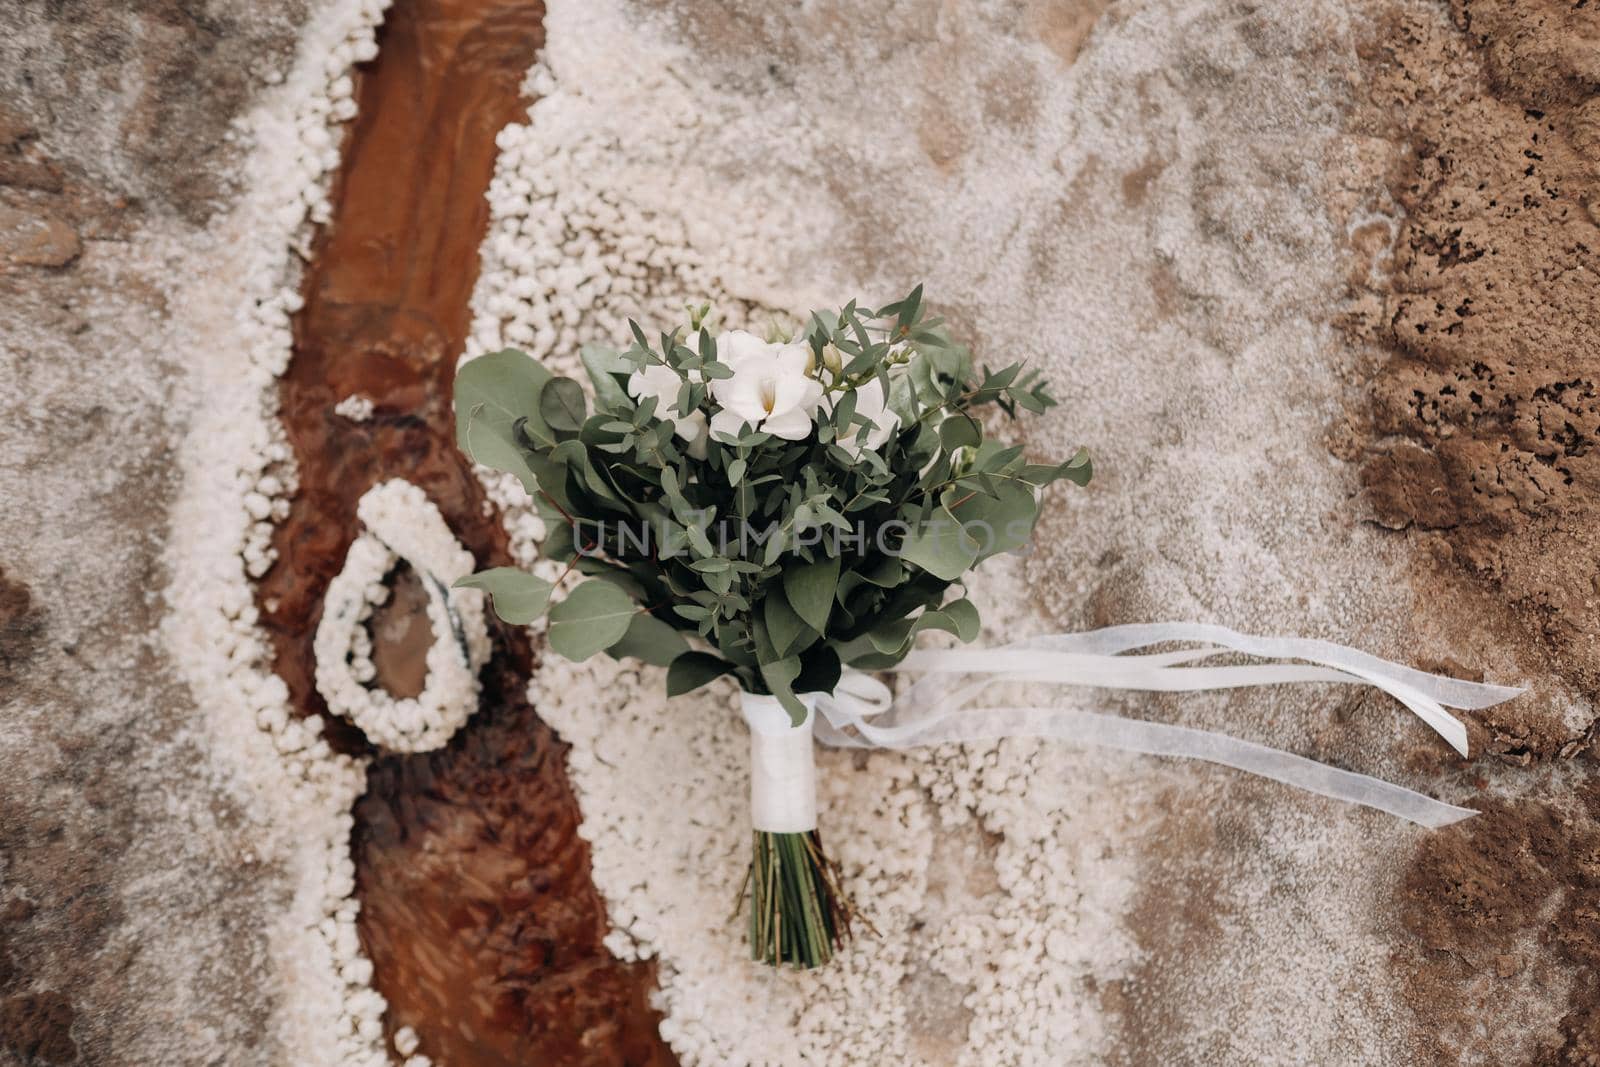 the wedding bouquet rests on a salty texture.The decor at the wedding by Lobachad